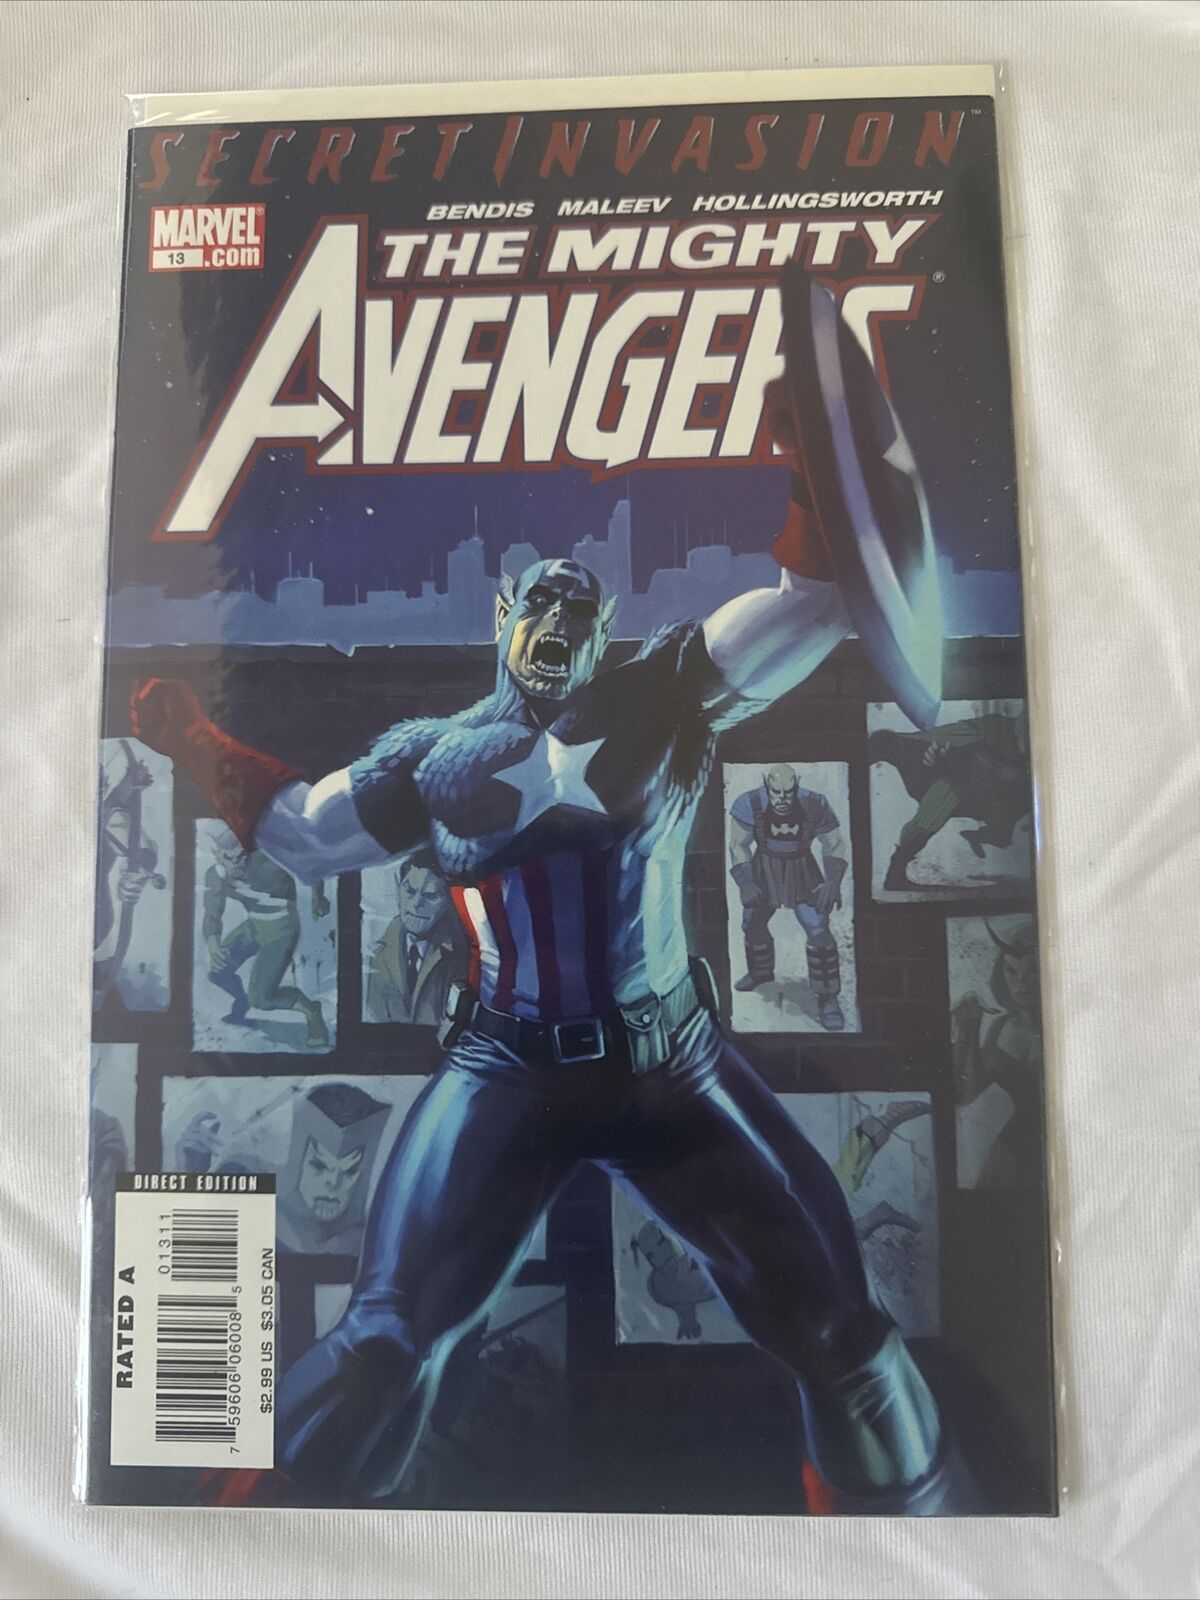 The Mighty Avengers #13 (2008) “Secret Invasion” Crossover